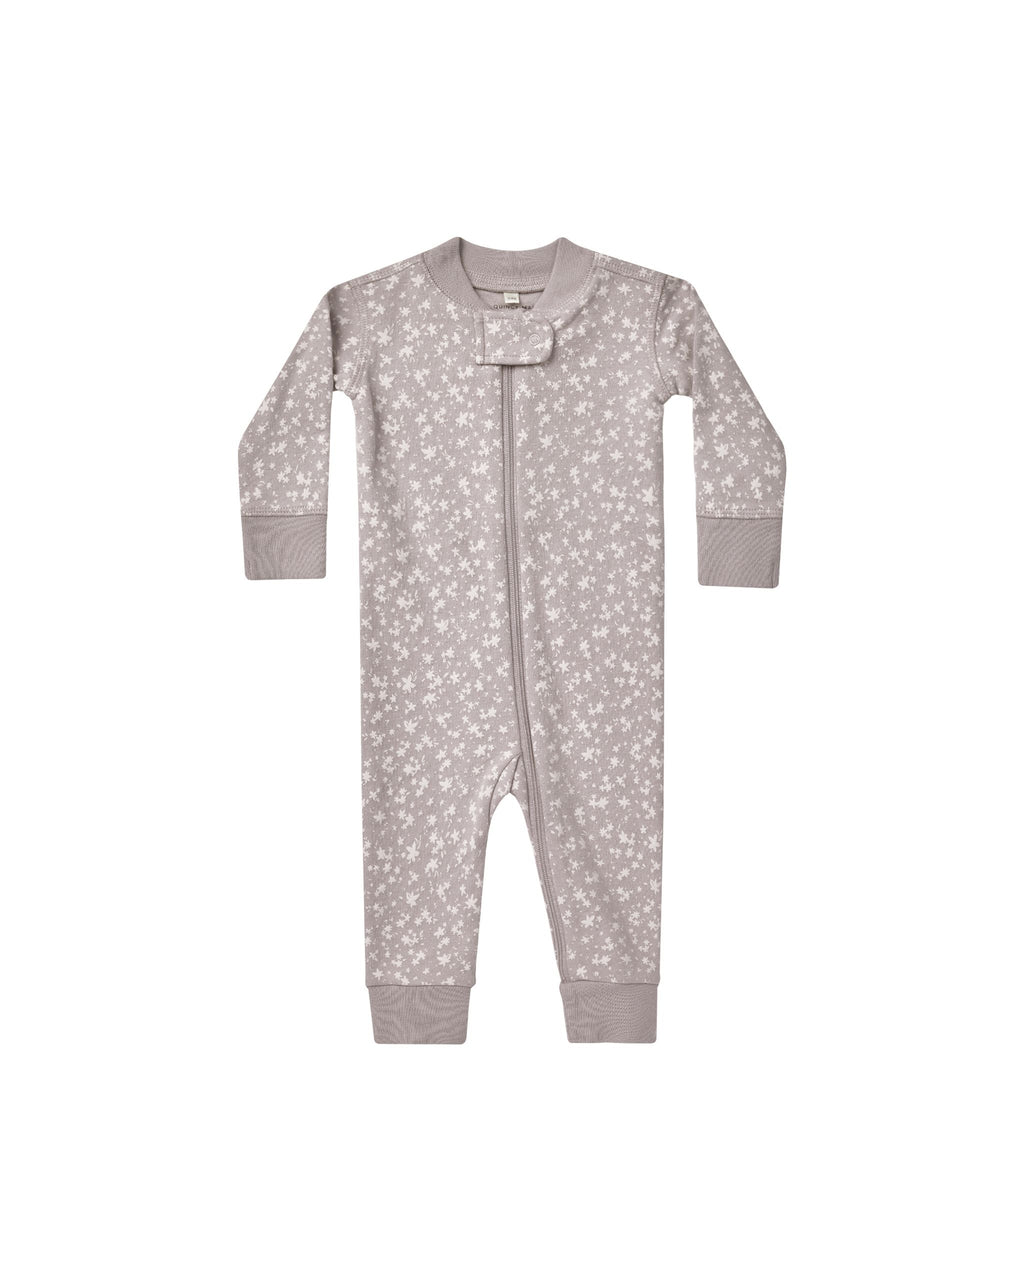 Wild Ivy - Online baby + kids clothing store